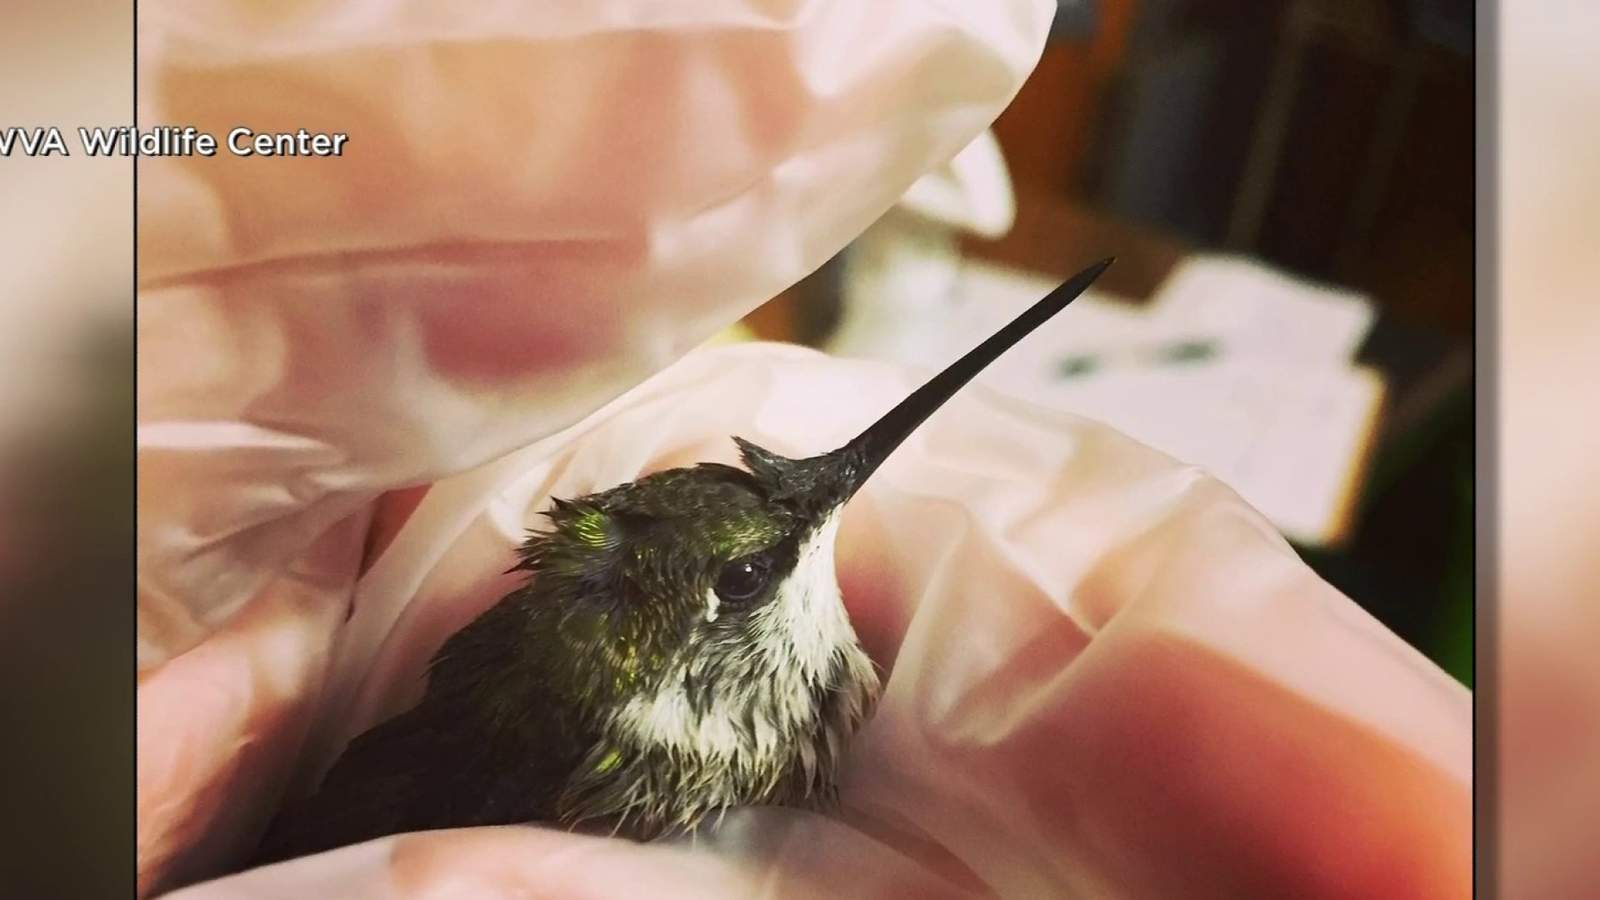 They’re back! First hummingbirds spotted in Southwest Virginia